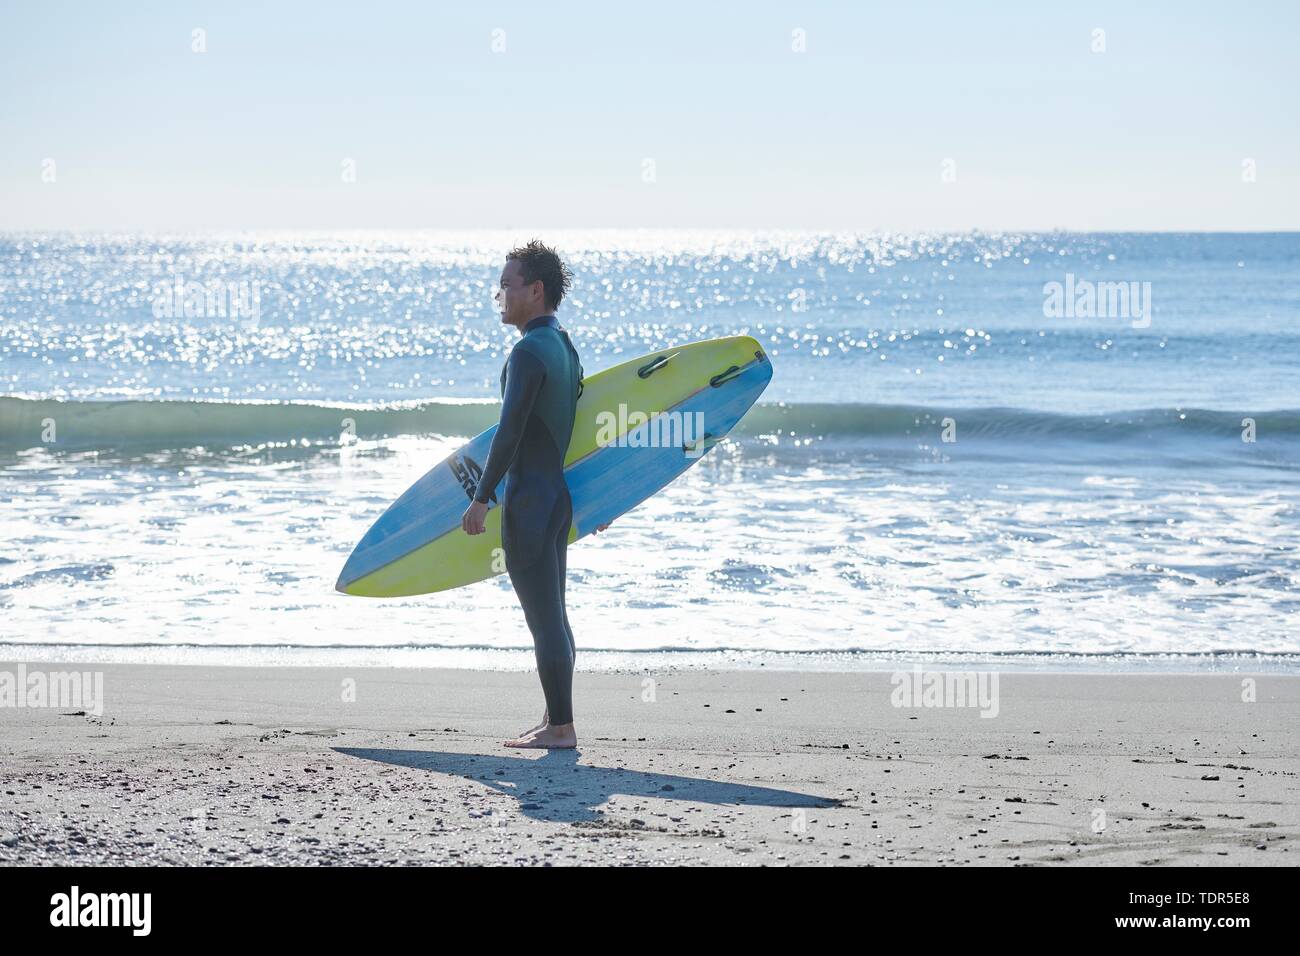 Japanese surfer at the beach Stock Photo